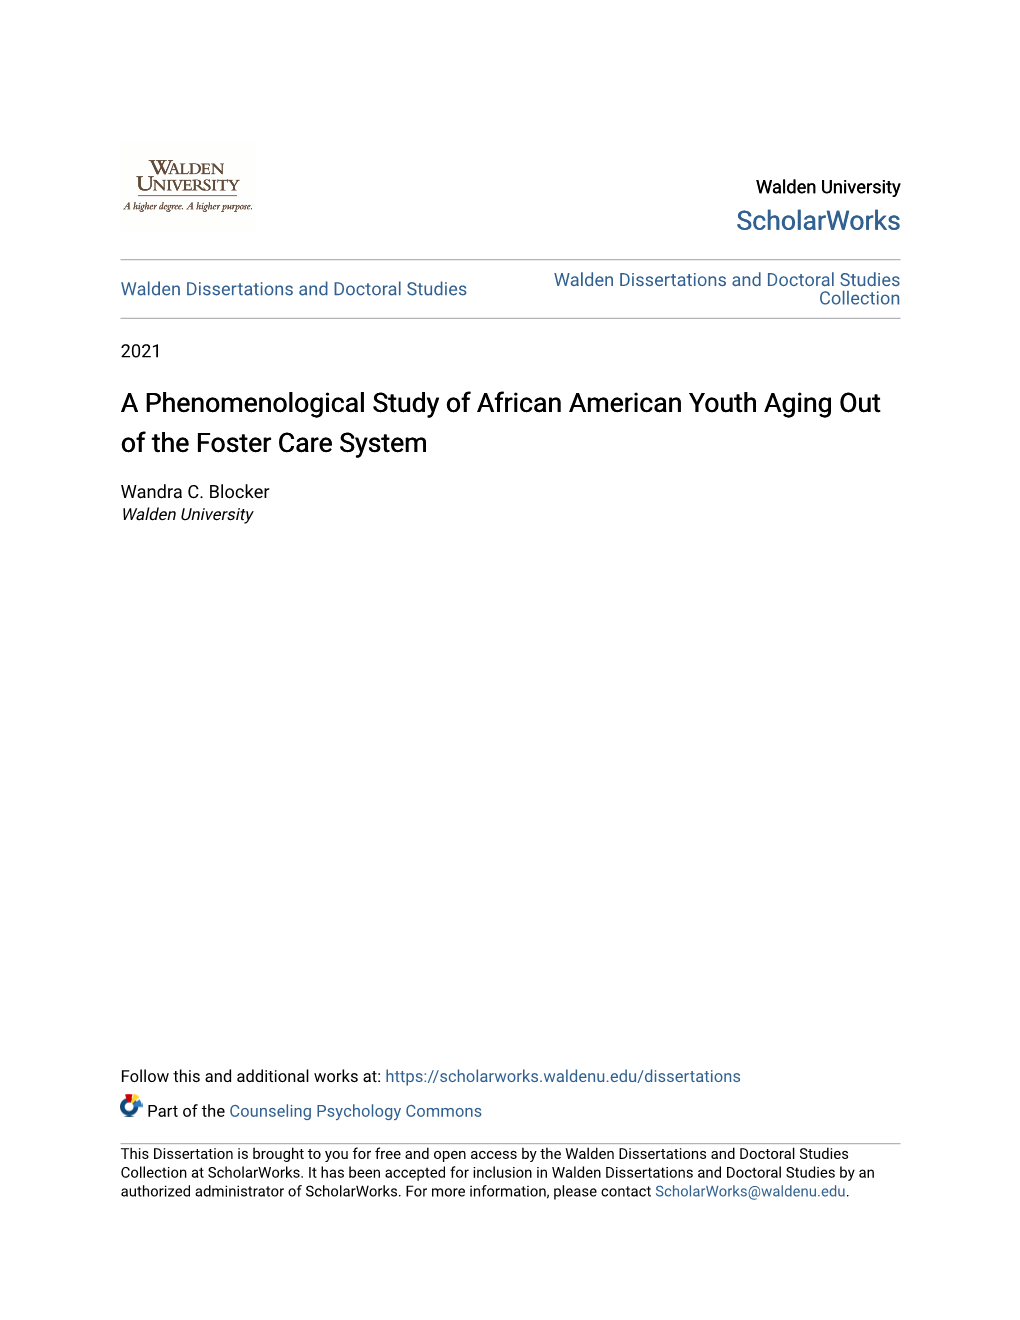 A Phenomenological Study of African American Youth Aging out of the Foster Care System